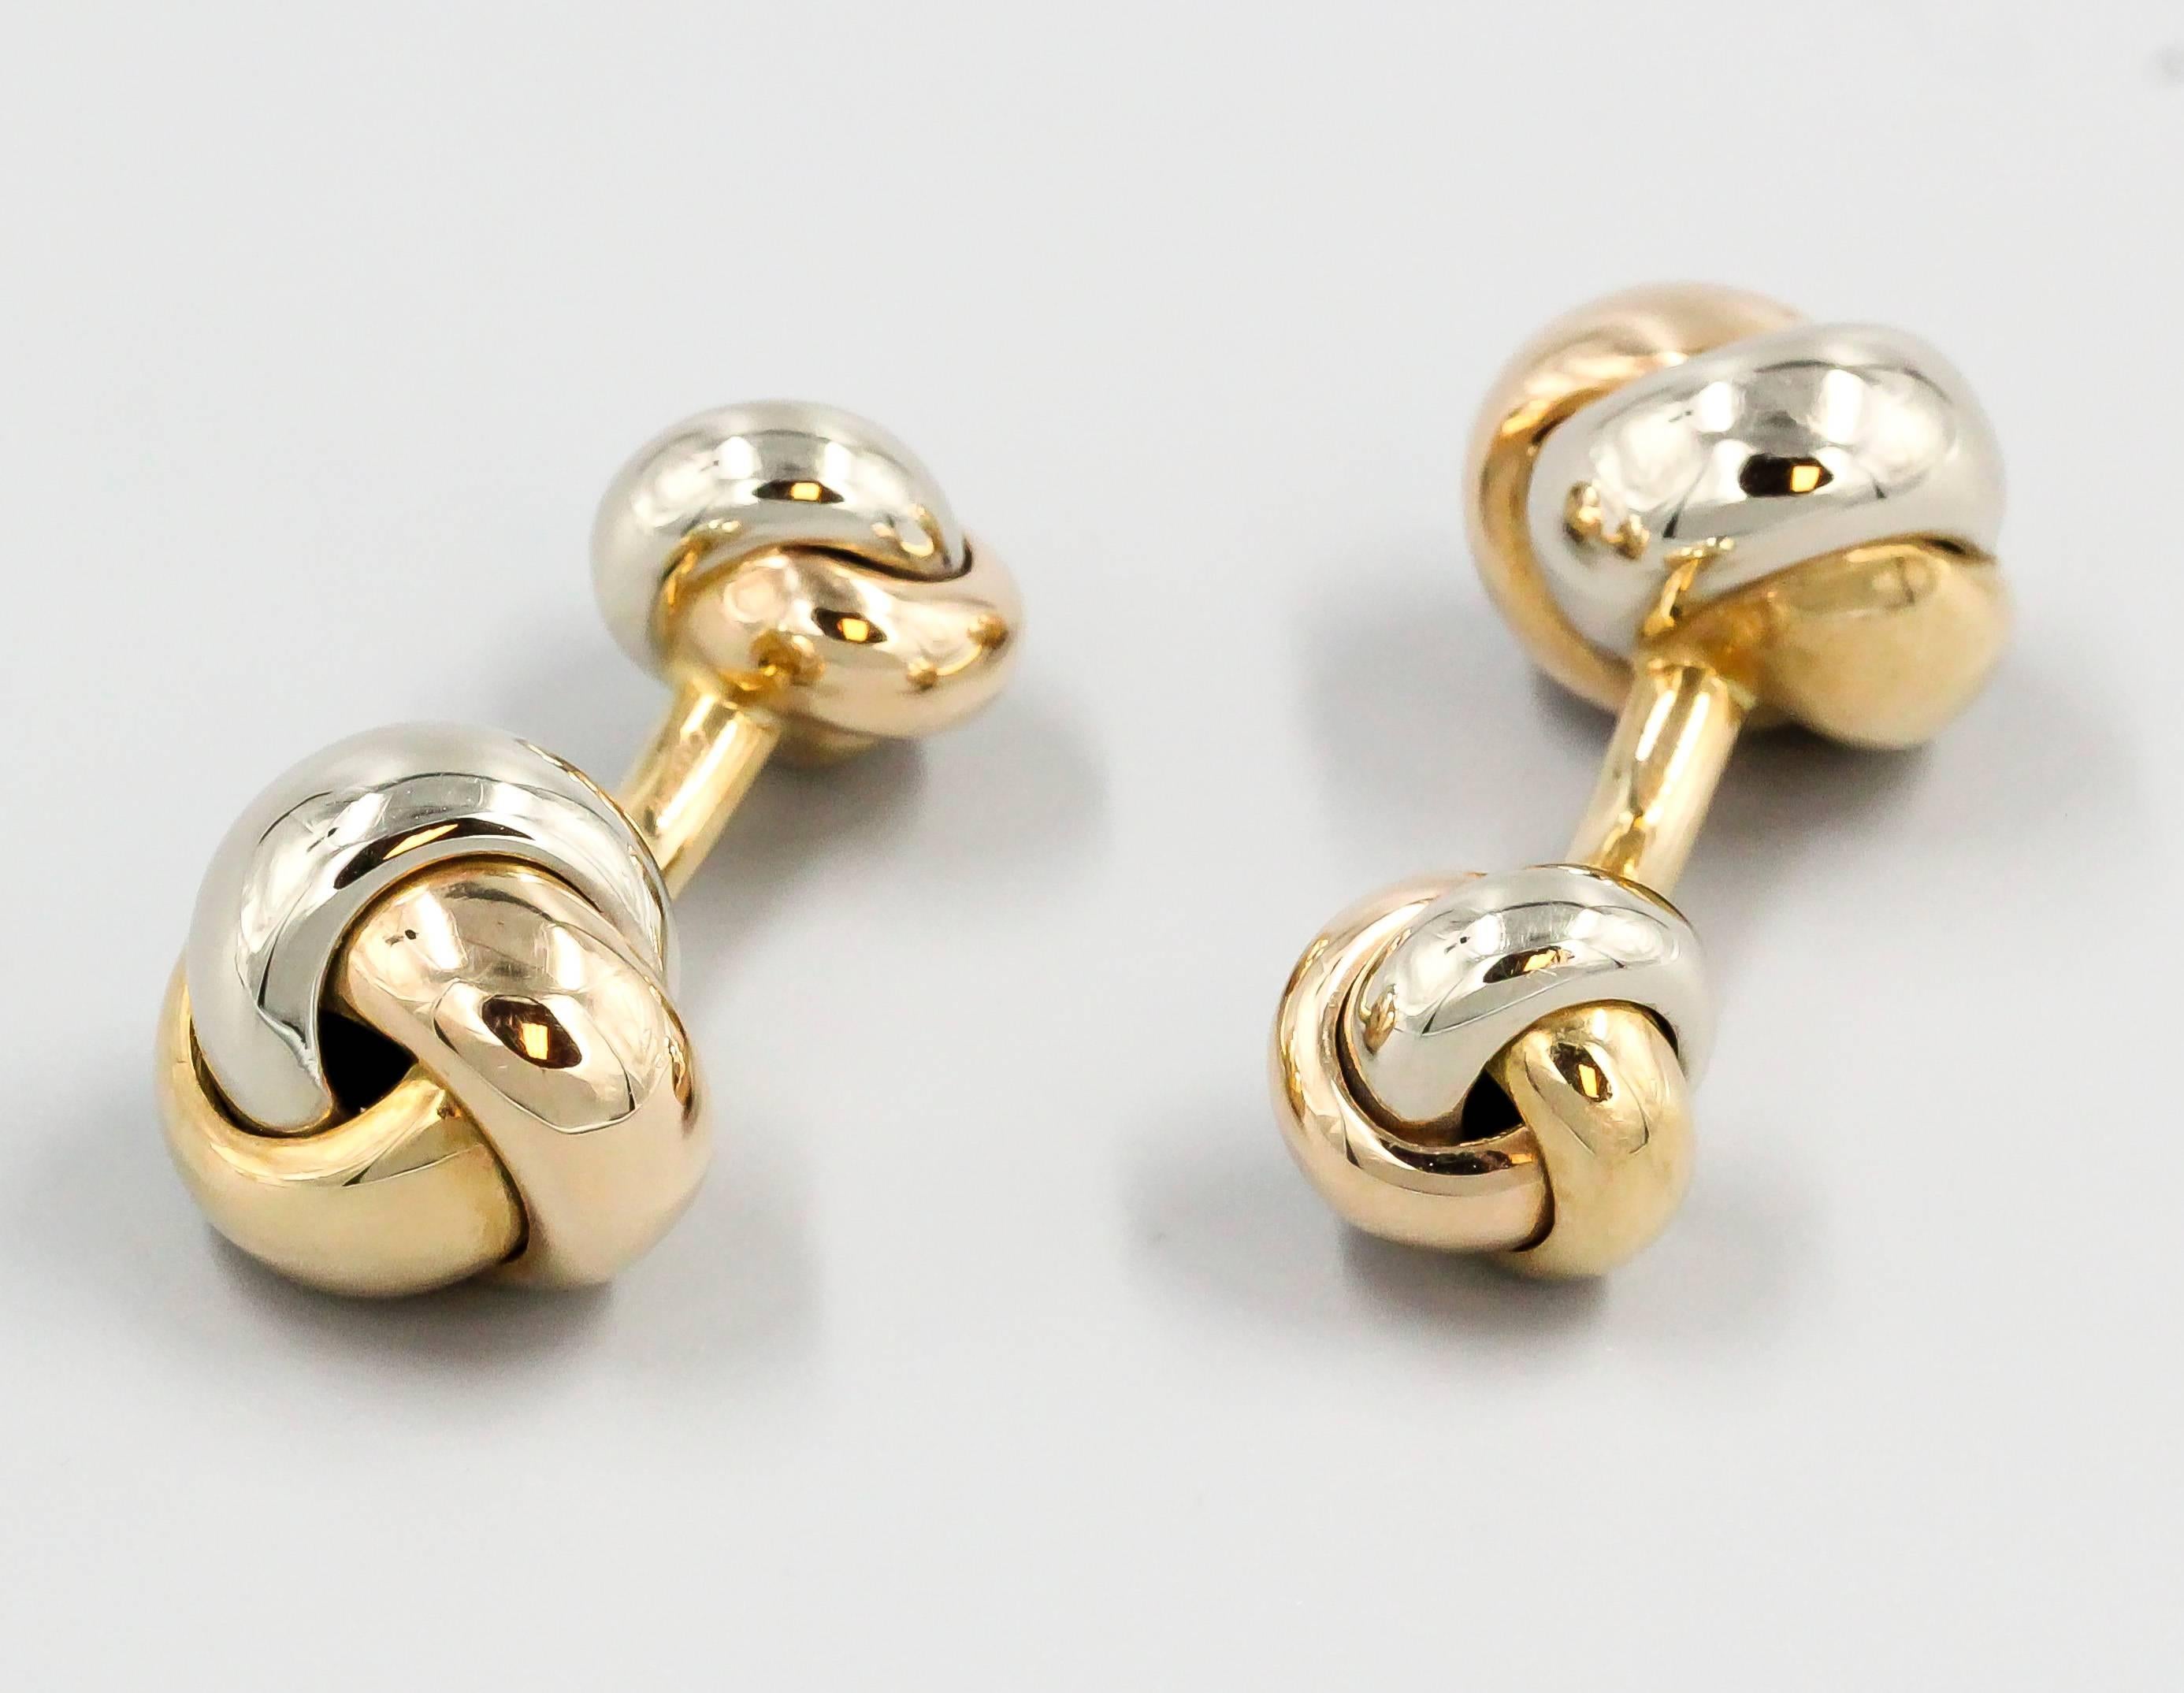 Stylish 18K 3 color gold cufflinks from the 